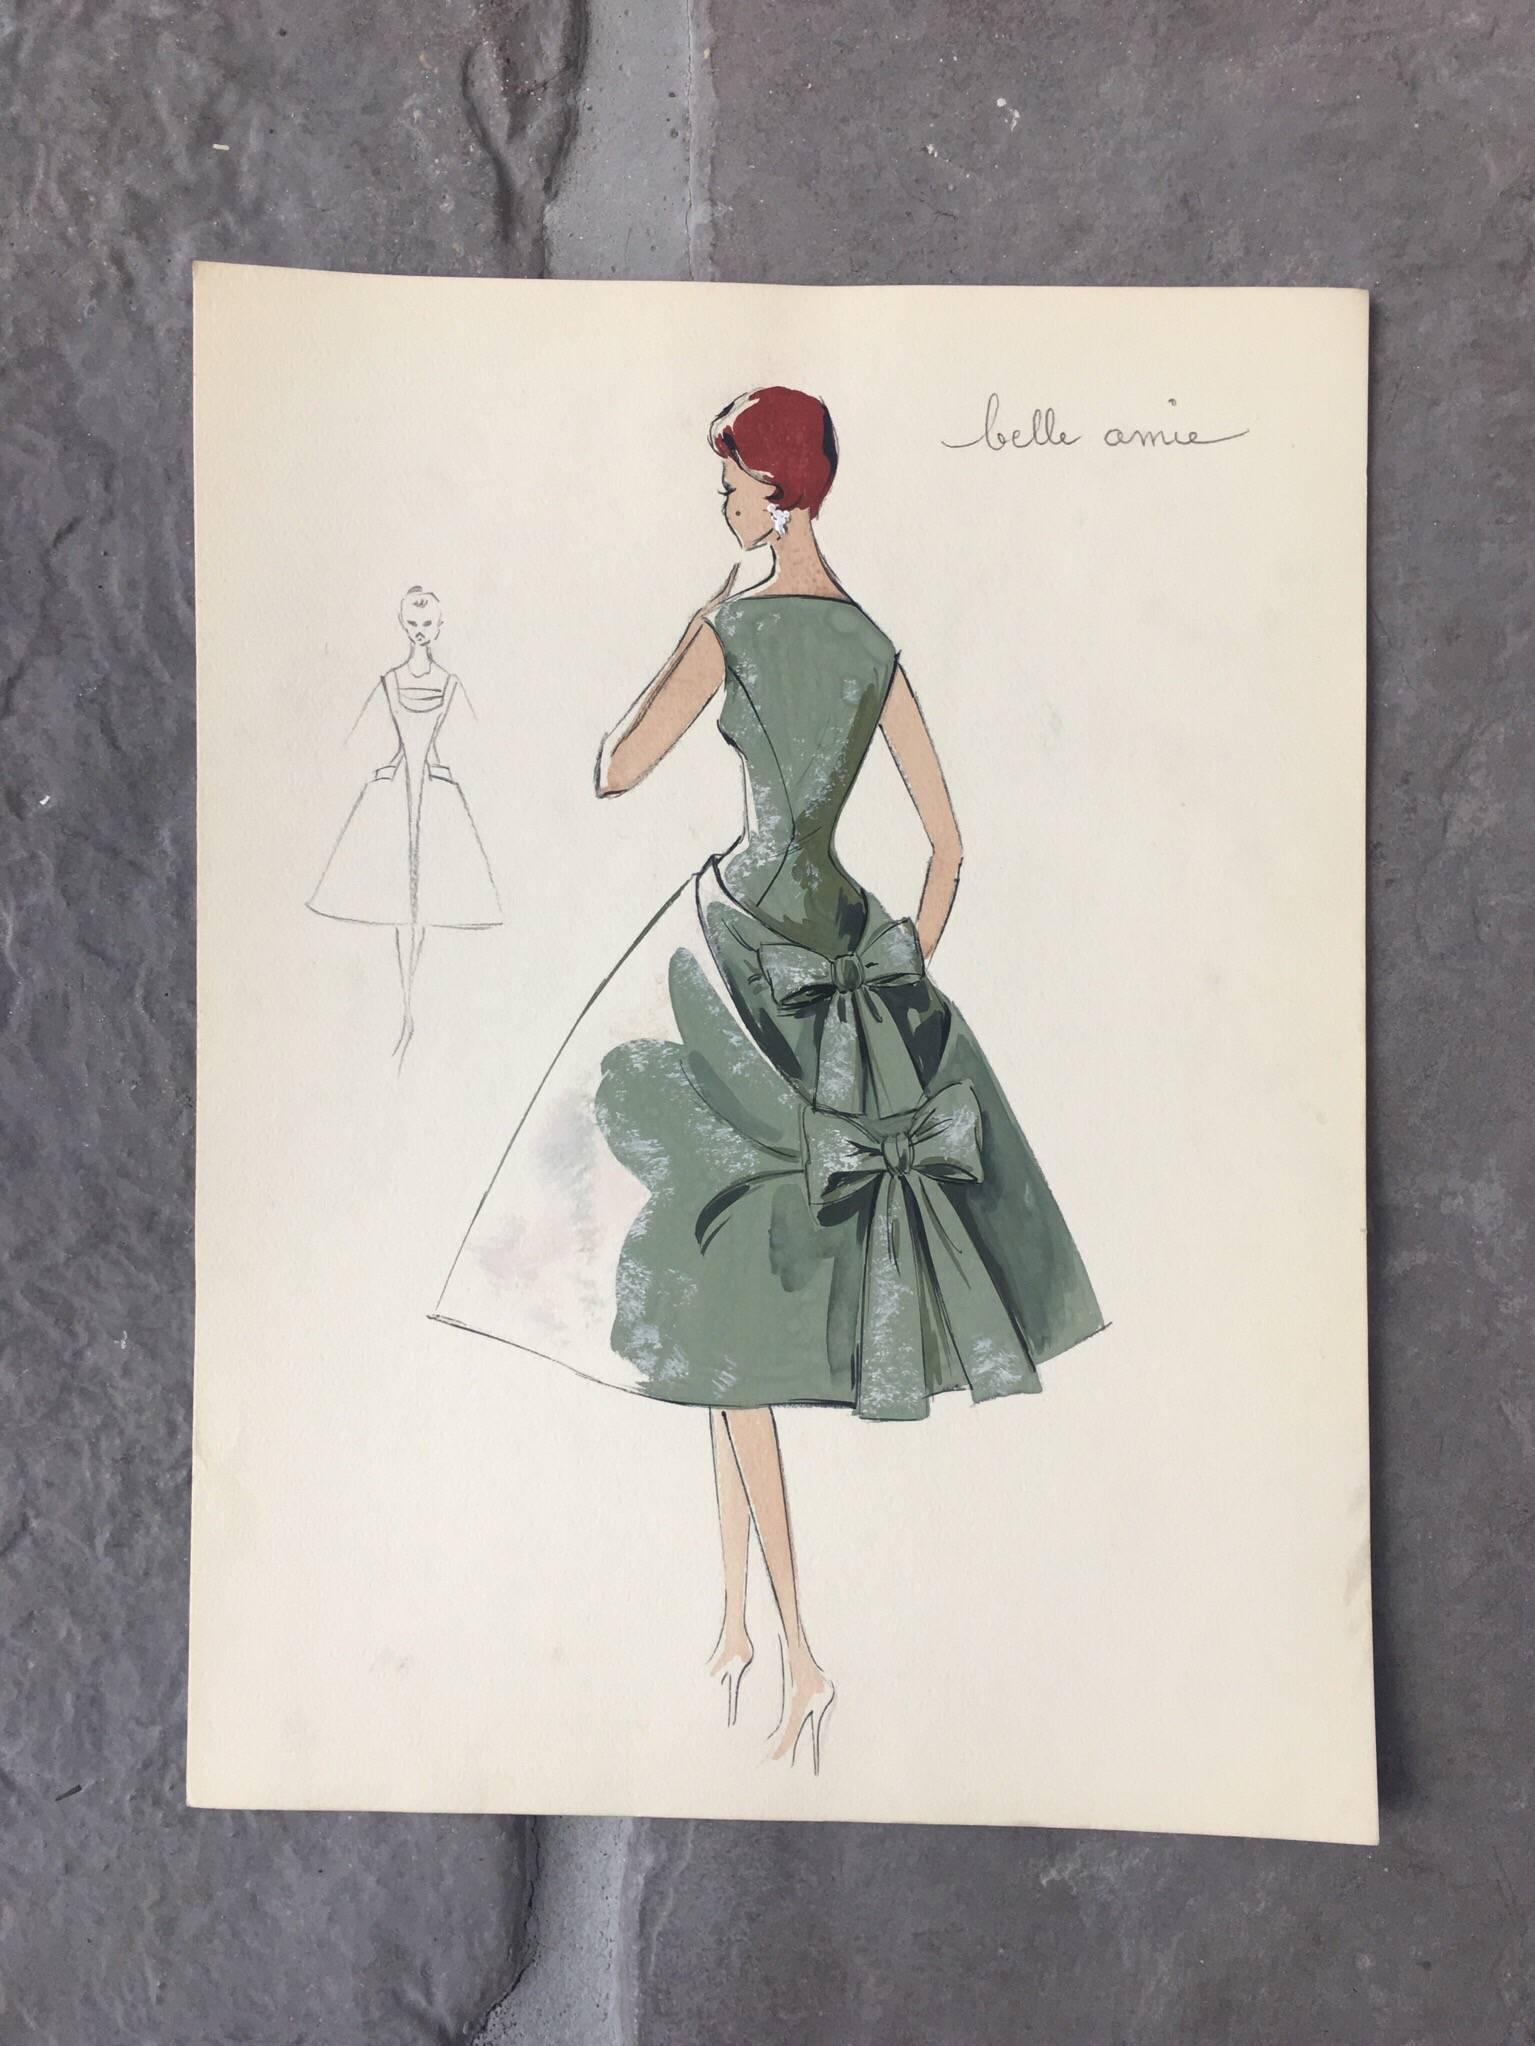 Lady in Green Cocktail Dress 1950's Parisian Fashion Illustration Sketch - Painting by Unknown